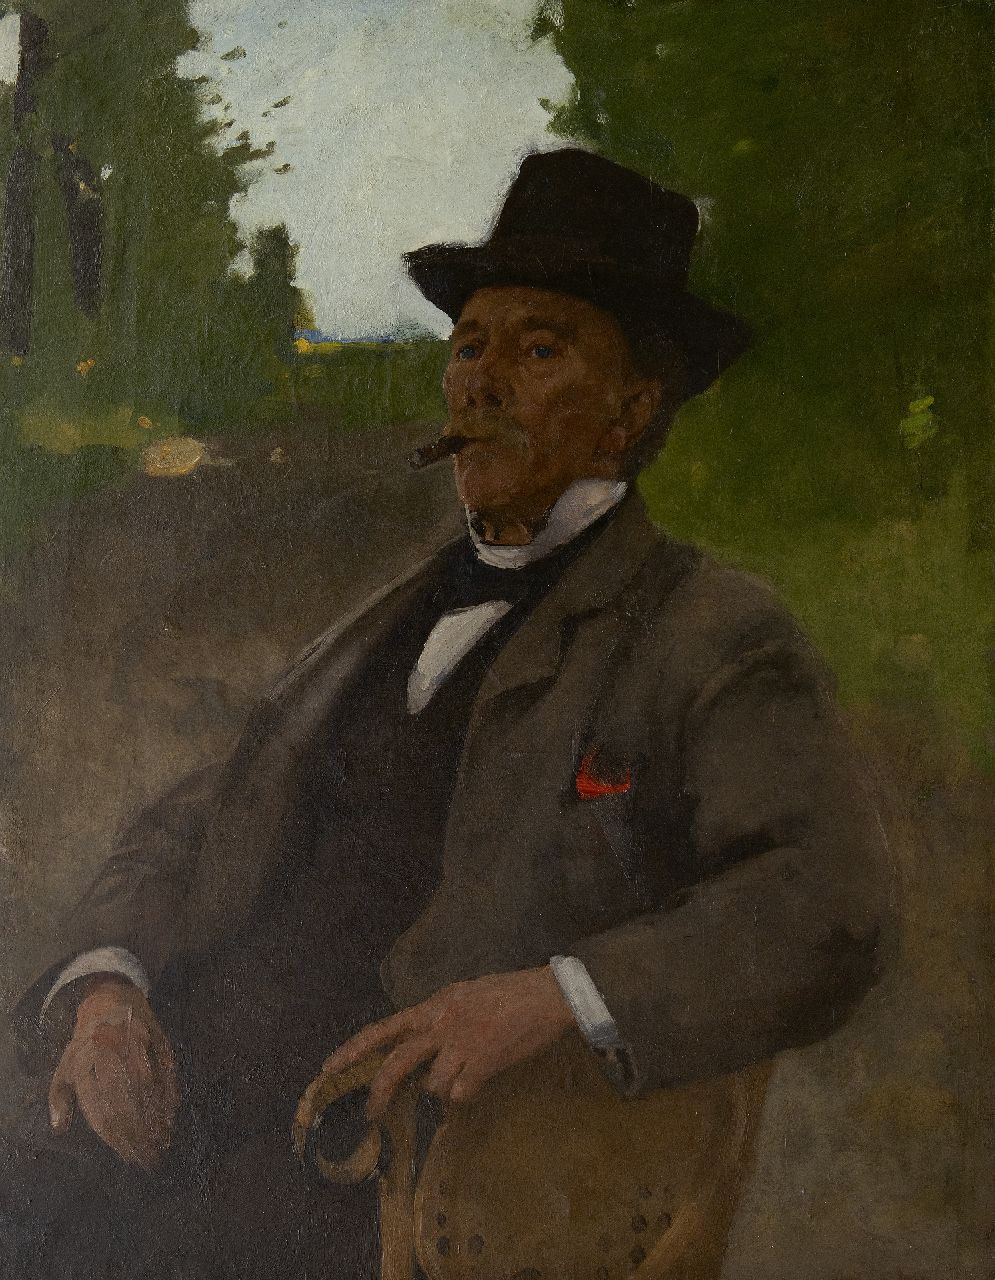 Witsen W.A.  | 'Willem' Arnold Witsen | Paintings offered for sale | Portrait of Jonas Witsen, the painter's father, oil on canvas 100.2 x 78.6 cm, painted ca. 1890